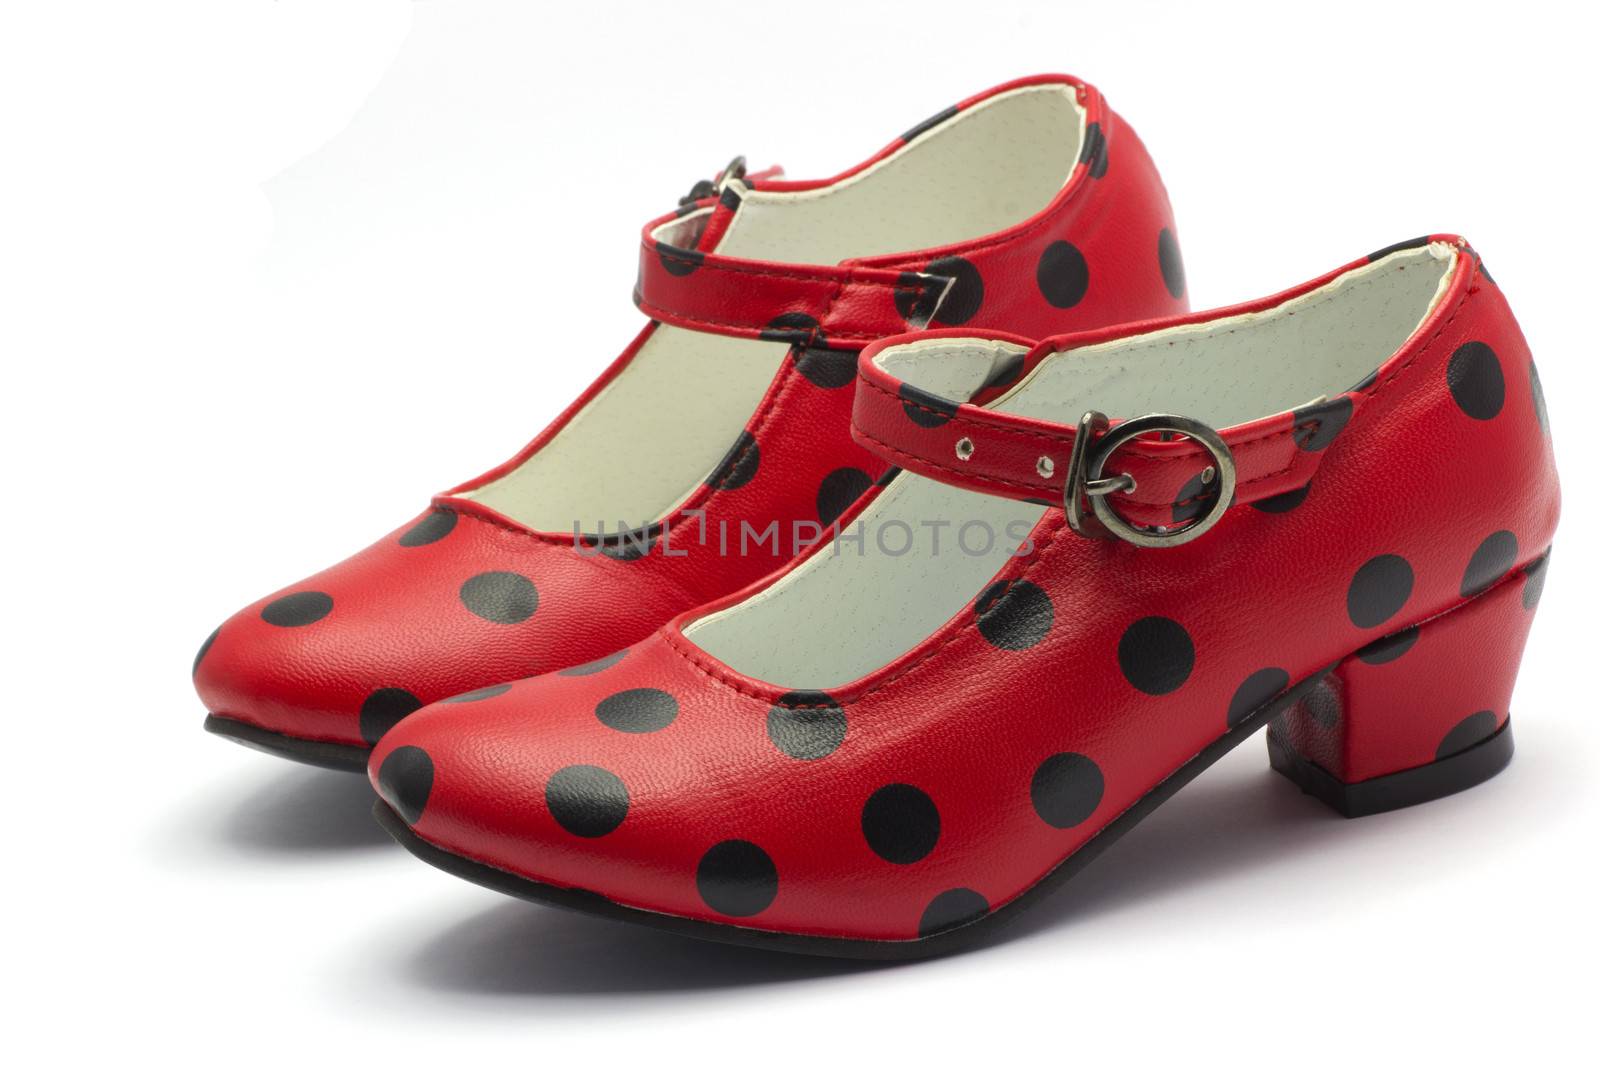 Pair of Sevillian flamenco dancing shoes.Red shoes with black do by jurgenfr